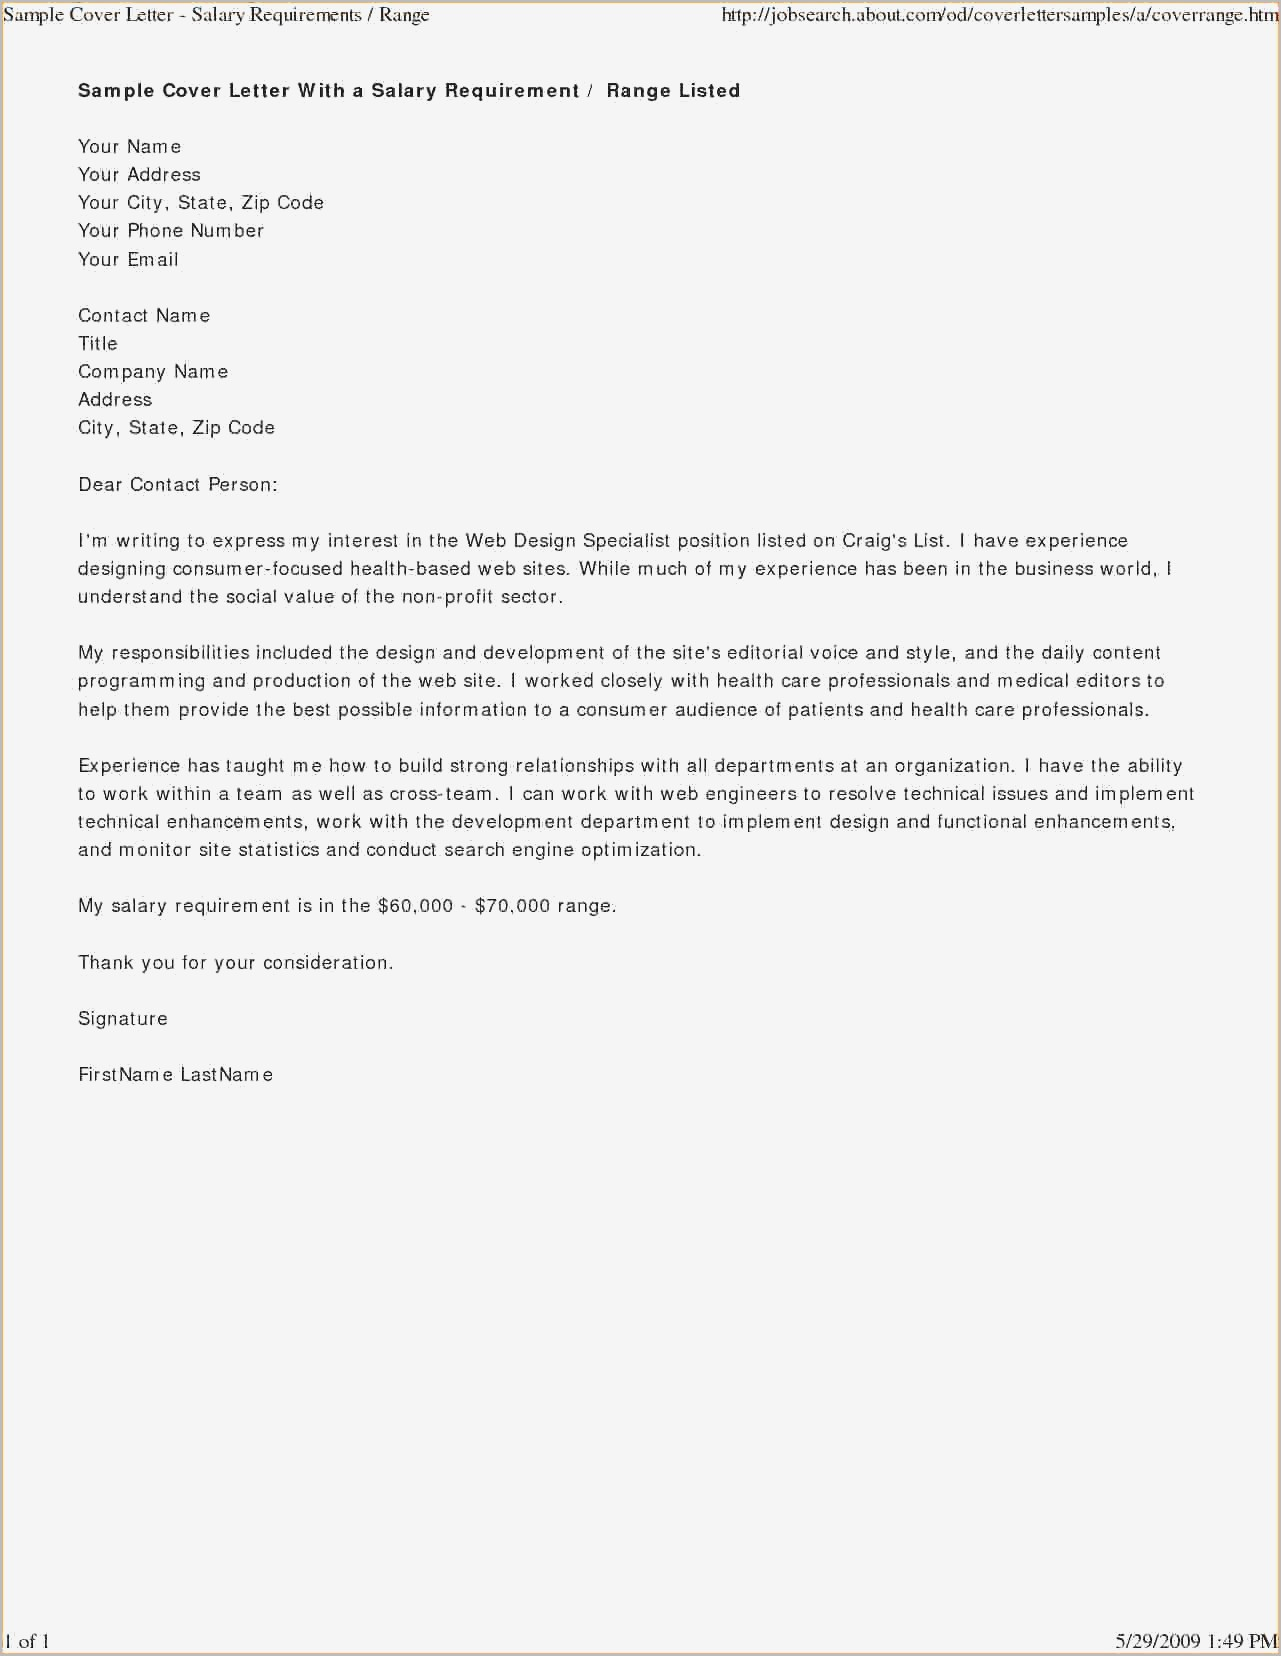 Employer Doesn T Offer Health Insurance Letter Template - Health Care Cover Letter Ideas